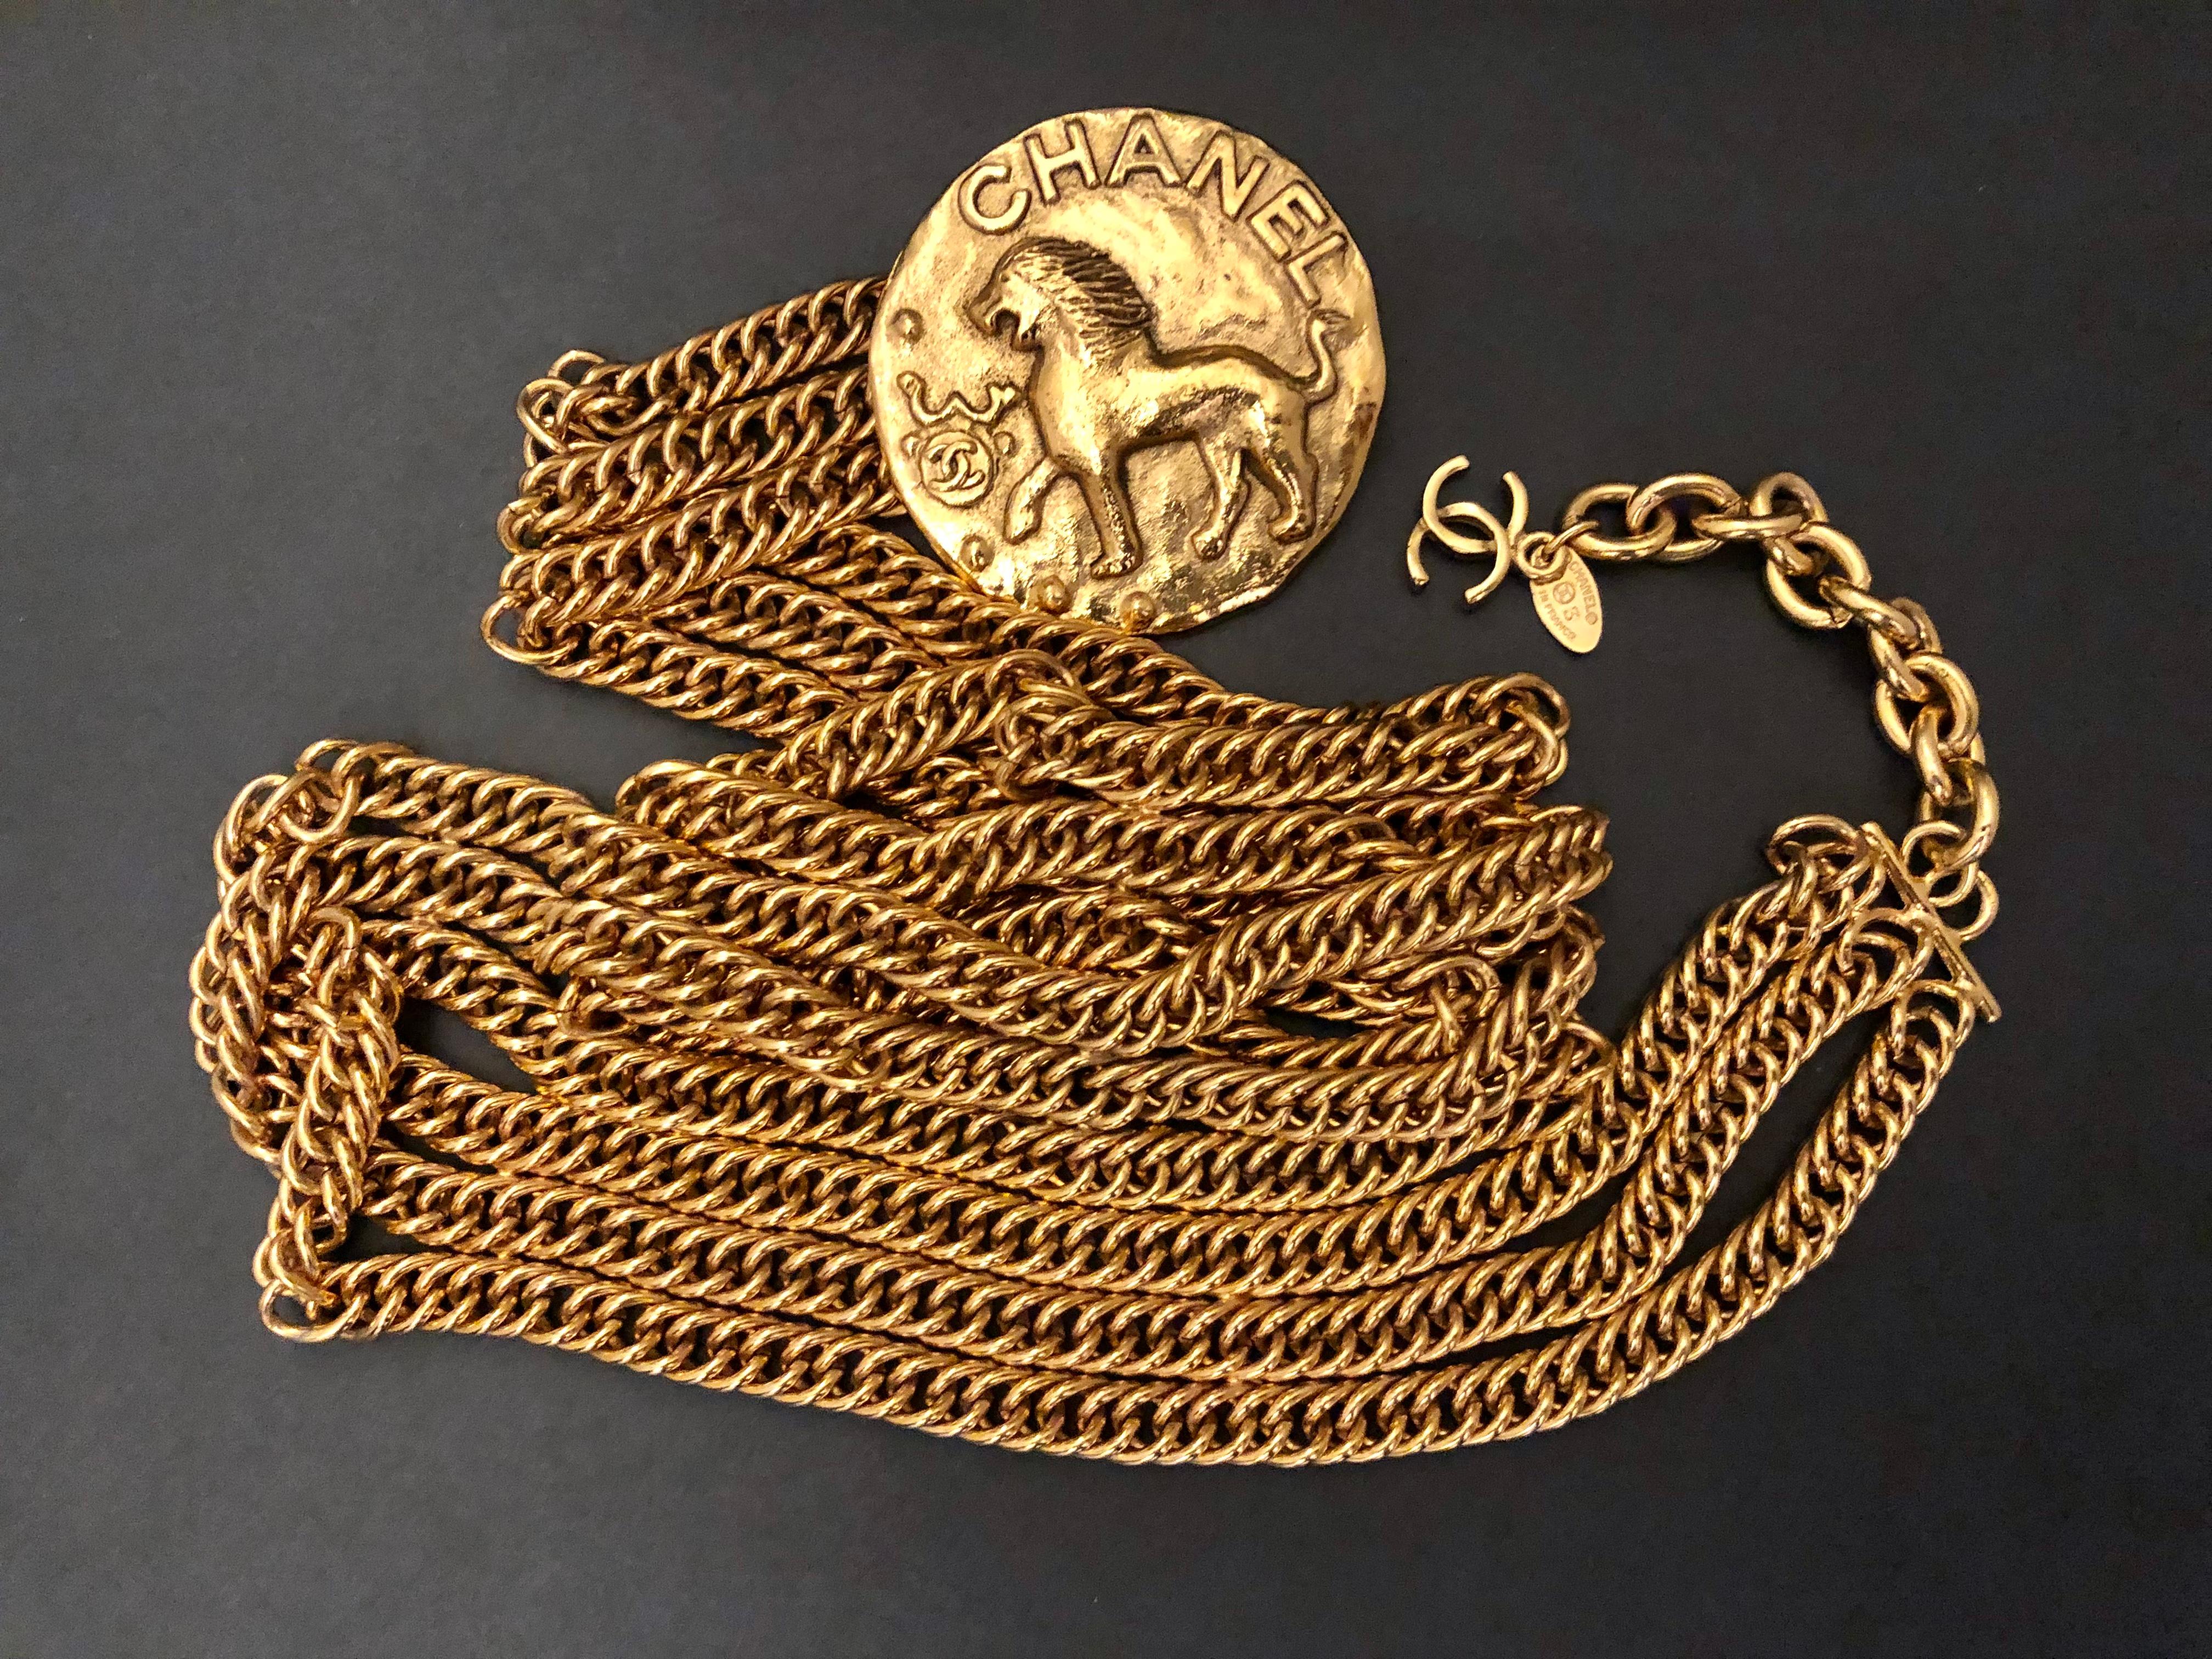 This vintage CHANEL chain belt is crafted of gold toned chains in triple strands adorned with a Byzantine Lion medallion charm. Stamped CHANEL 2 3 made in France. Adjustable hook fastening with a CC dangle charm. Total length measures approximately